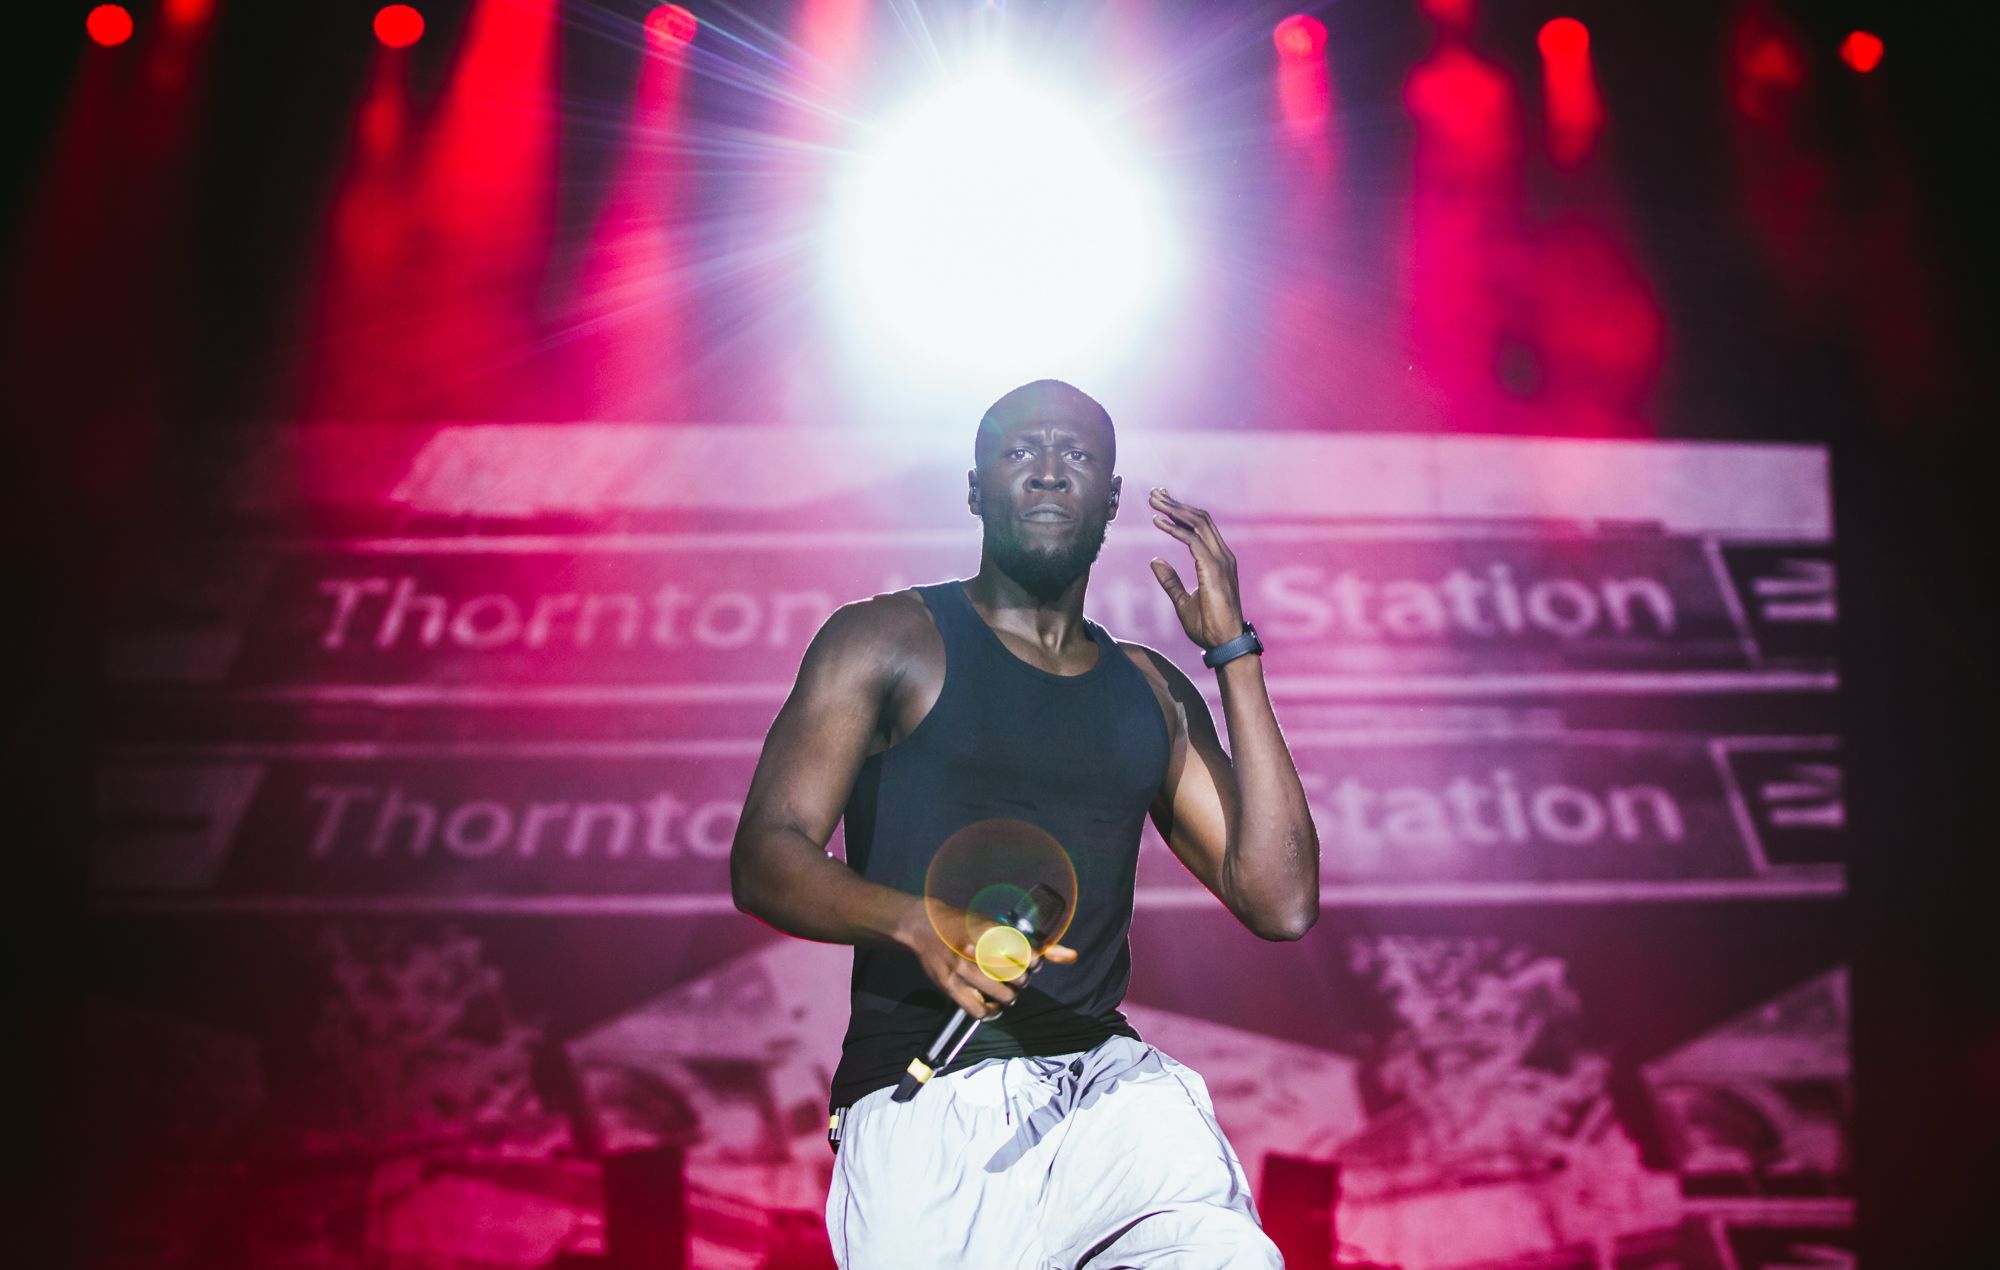 Sónar Festival adds Stormzy to its incredible line-up The British artist will be the protagonist of Sónar by Night on Friday, July 19th